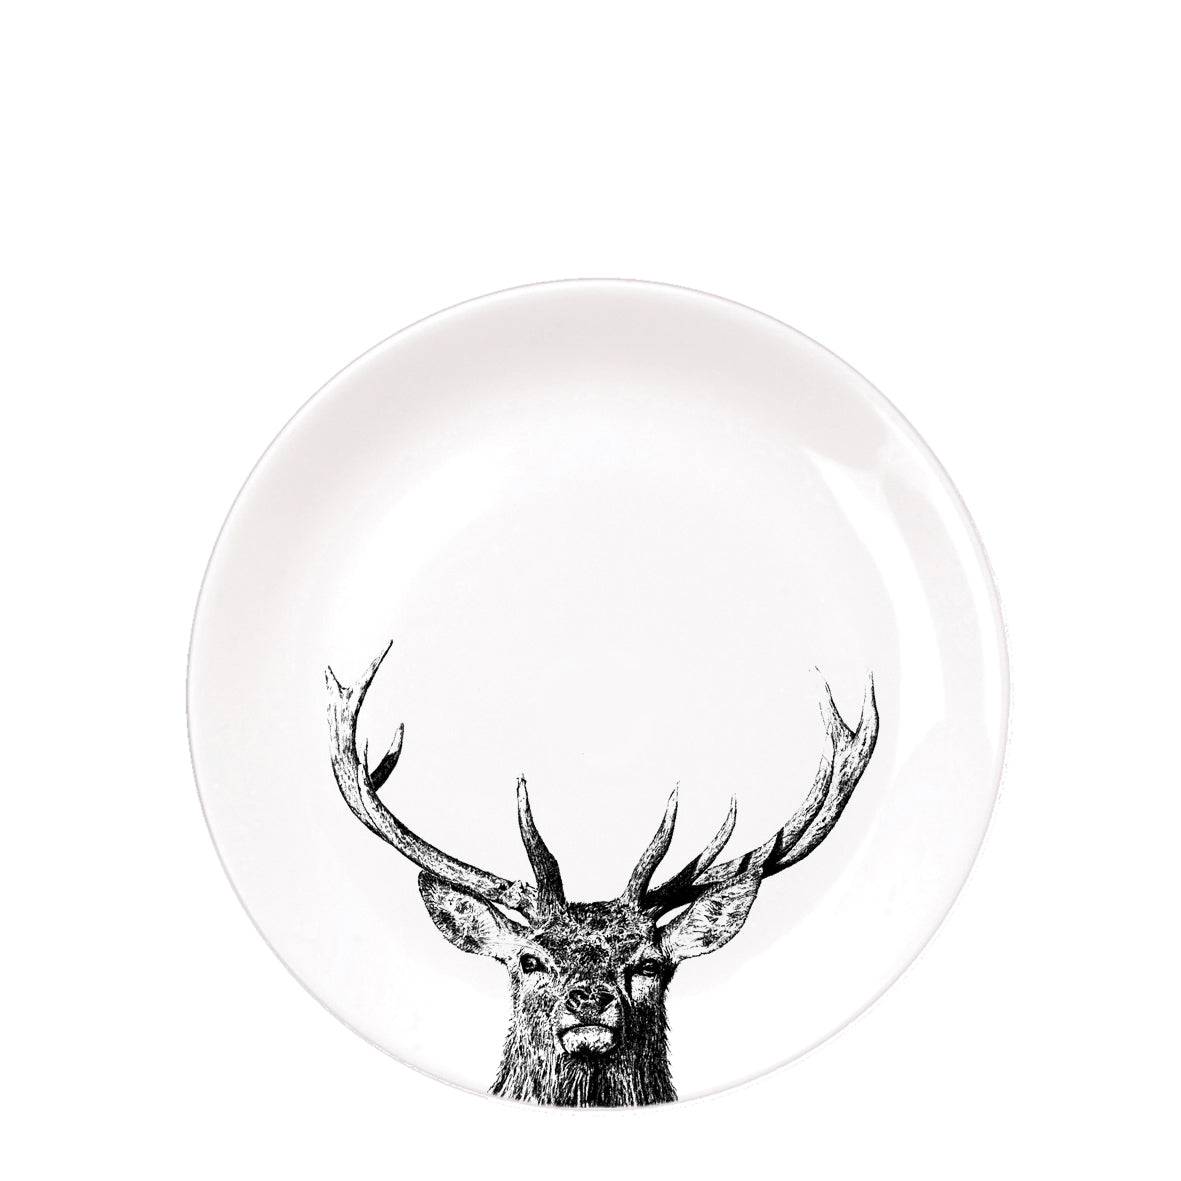 Majestic Stag Plate - Starter for sale - Woodcock and Cavendish